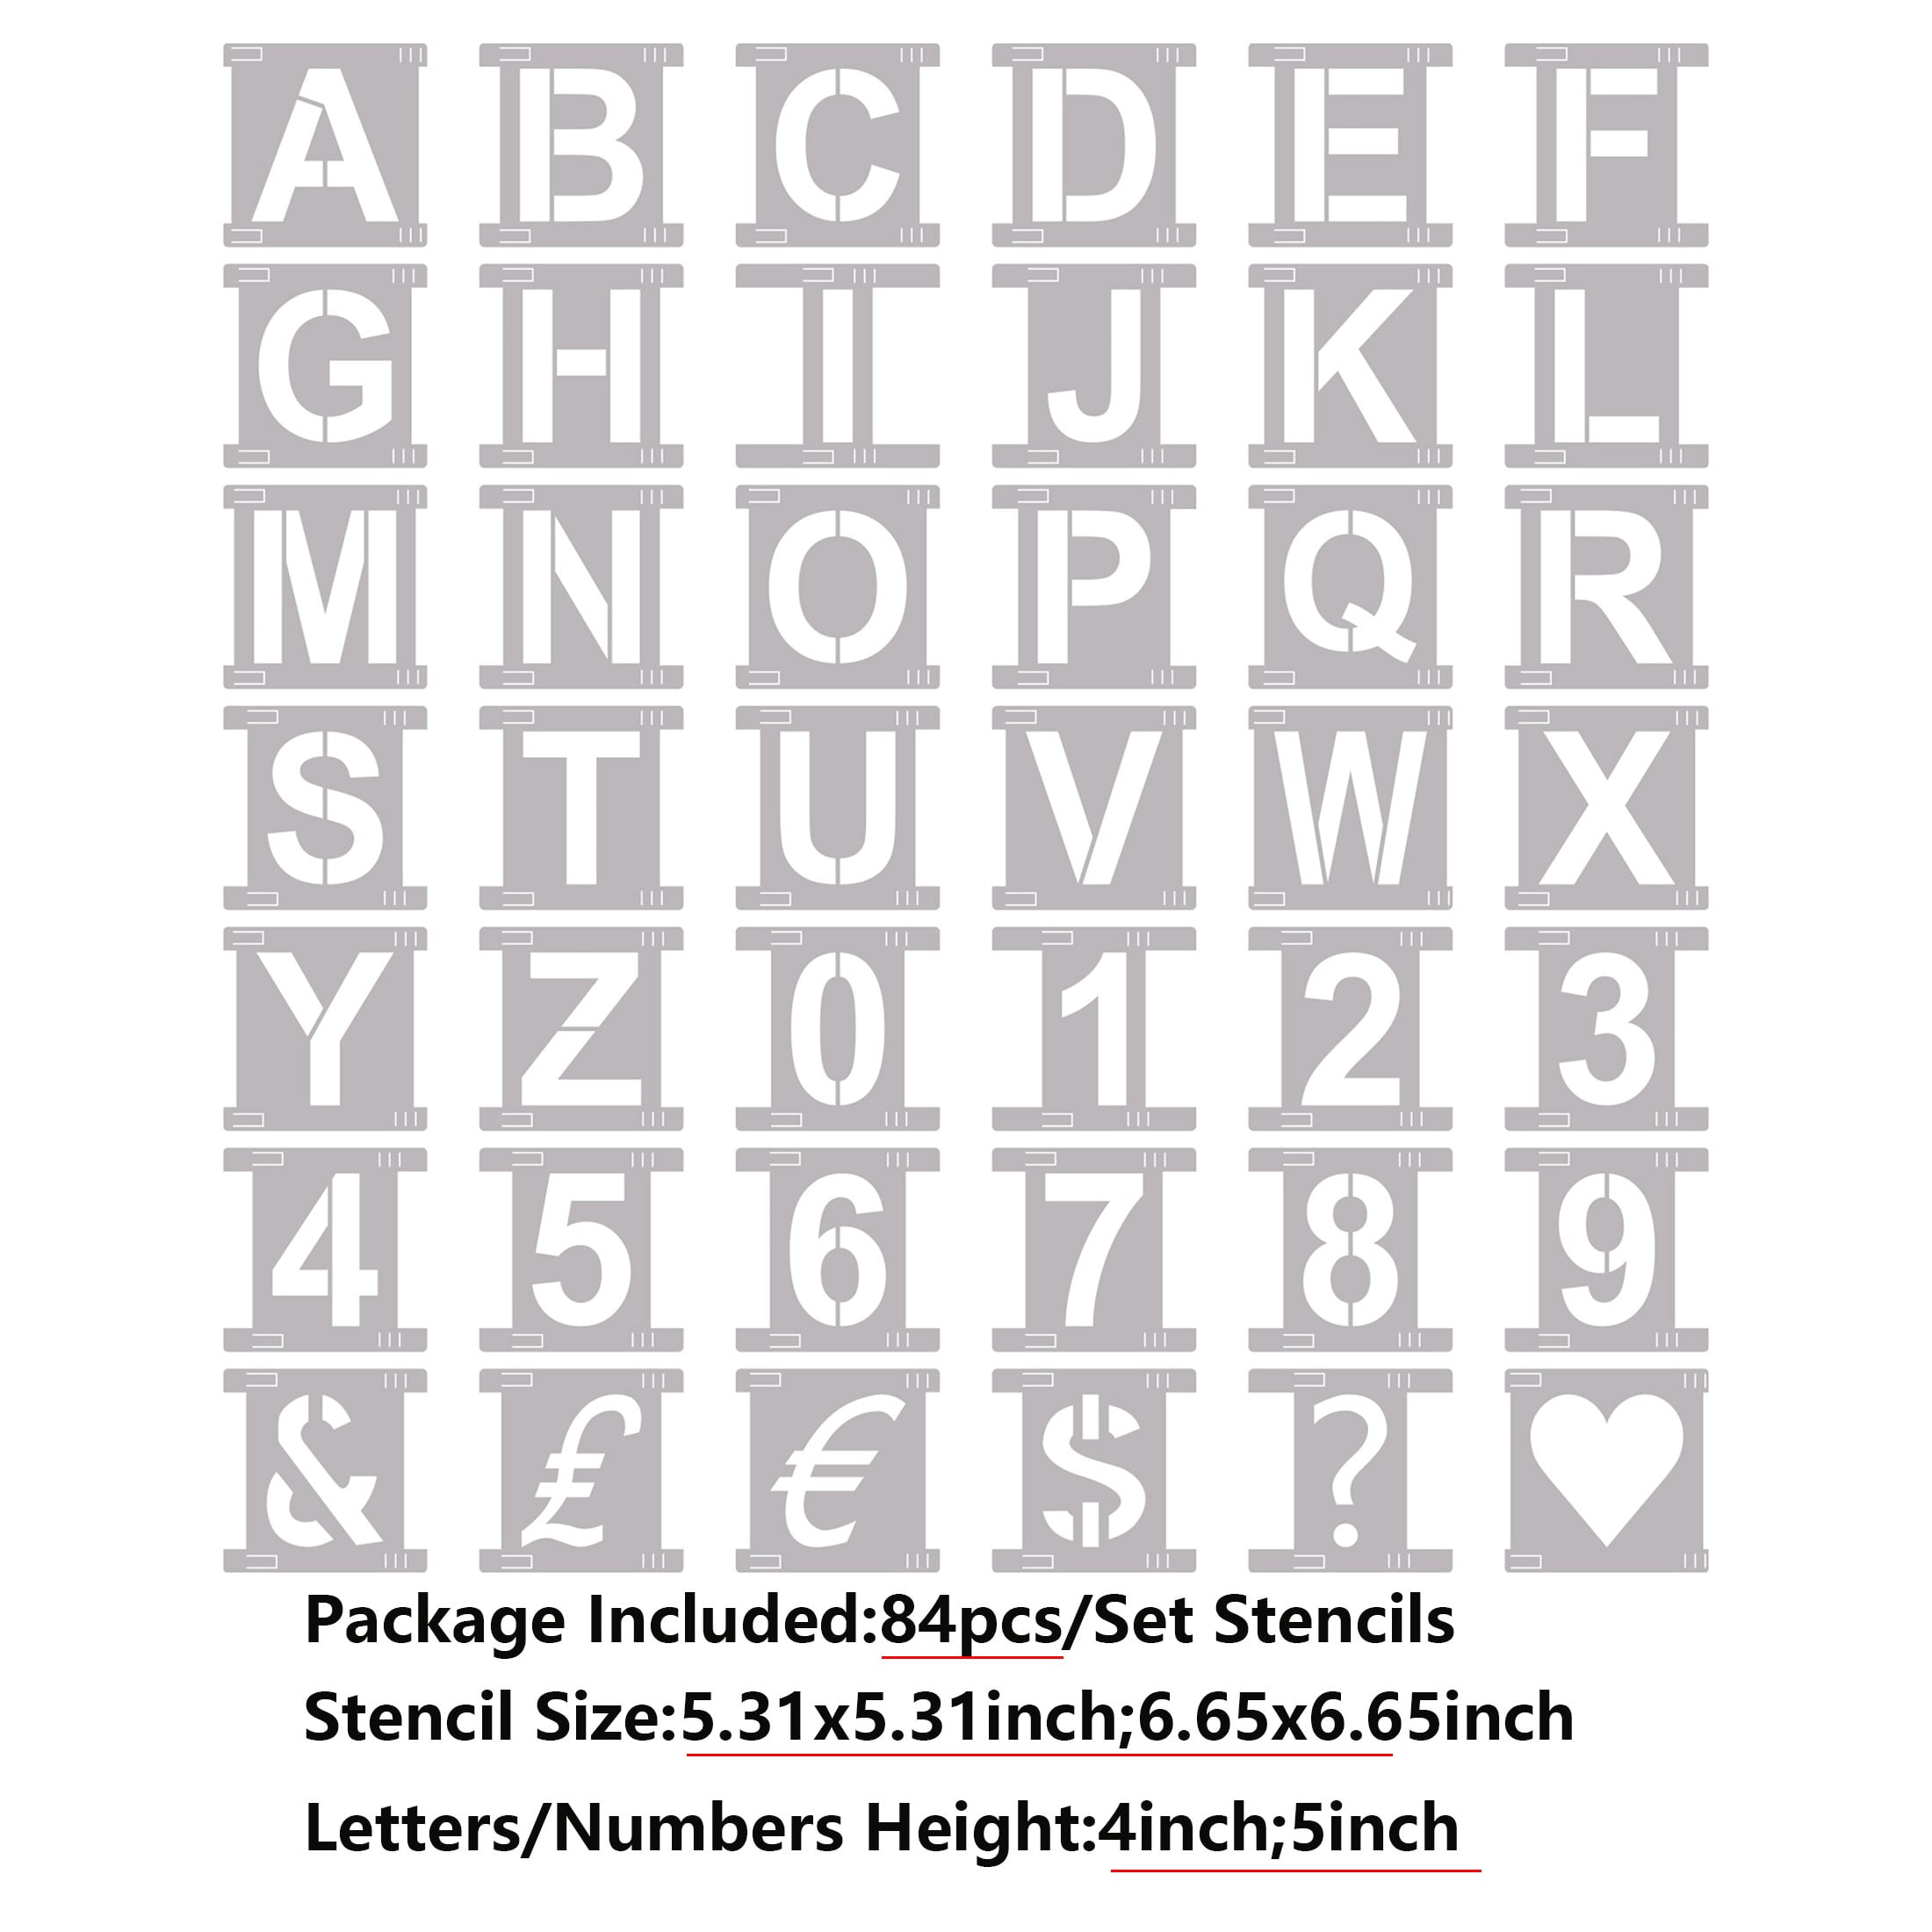 Industrial Single Use Stencils - One and Done Stencil Letters